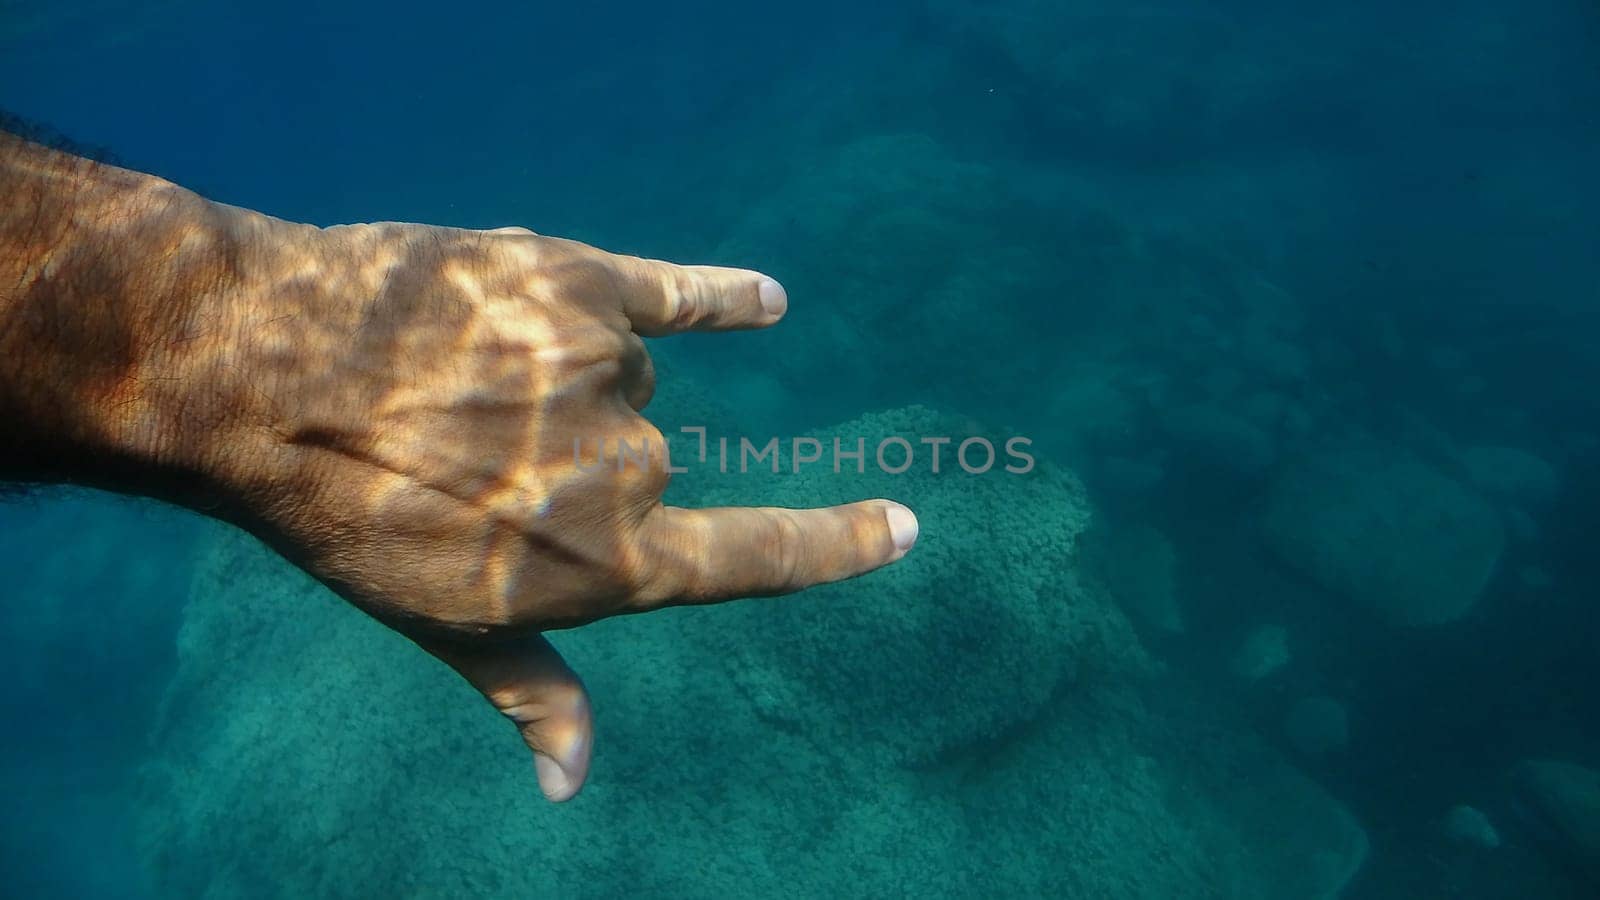 ily sign 3 fingers up human hand underwater detail by AndreaIzzotti